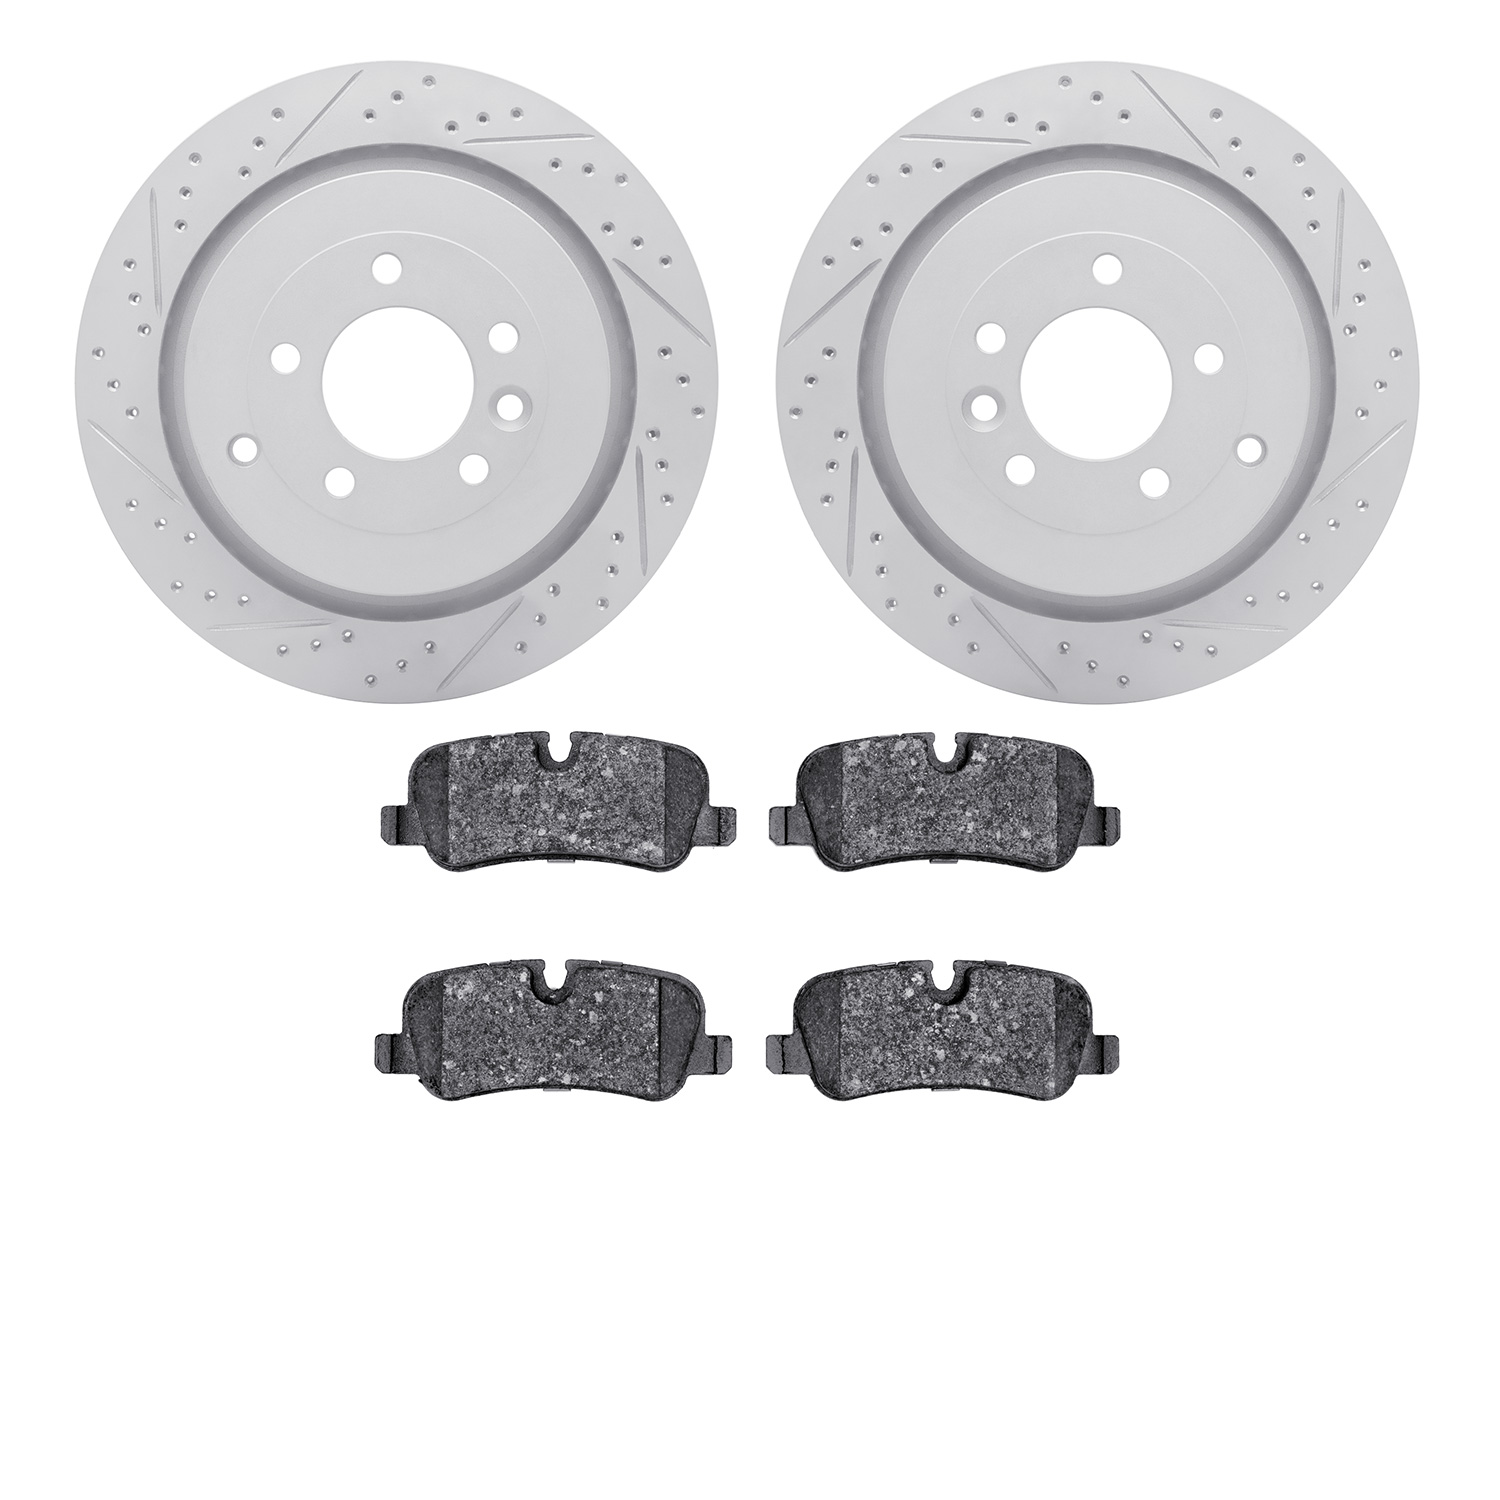 2502-11015 Geoperformance Drilled/Slotted Rotors w/5000 Advanced Brake Pads Kit, 2005-2016 Land Rover, Position: Rear